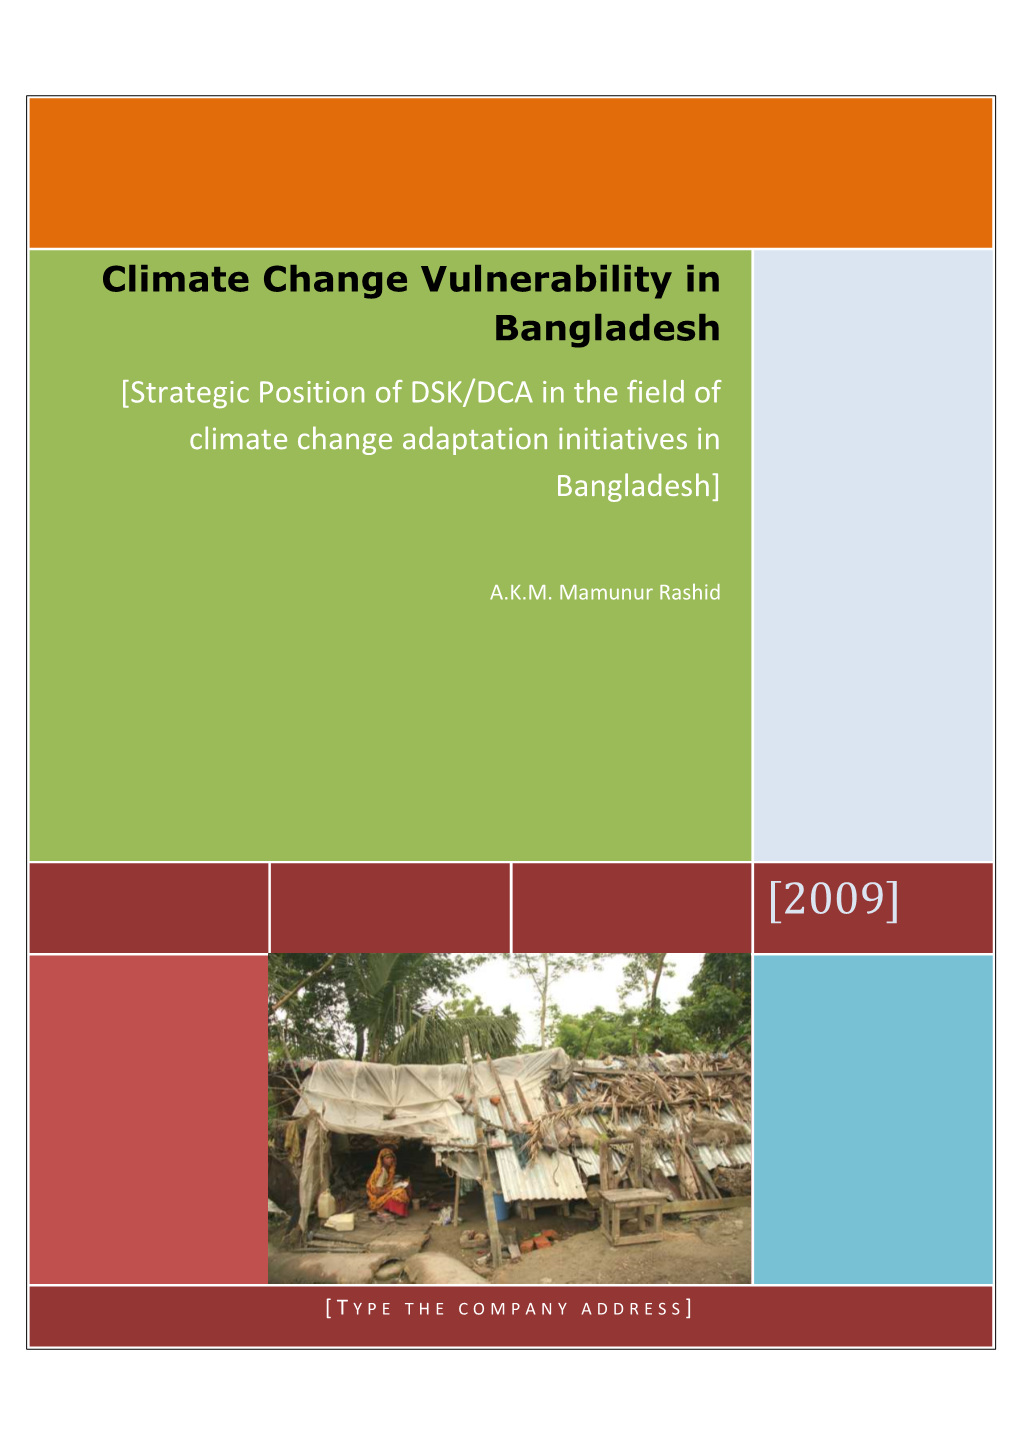 Climate Change Vulnerability in Bangladesh and Position of DSK